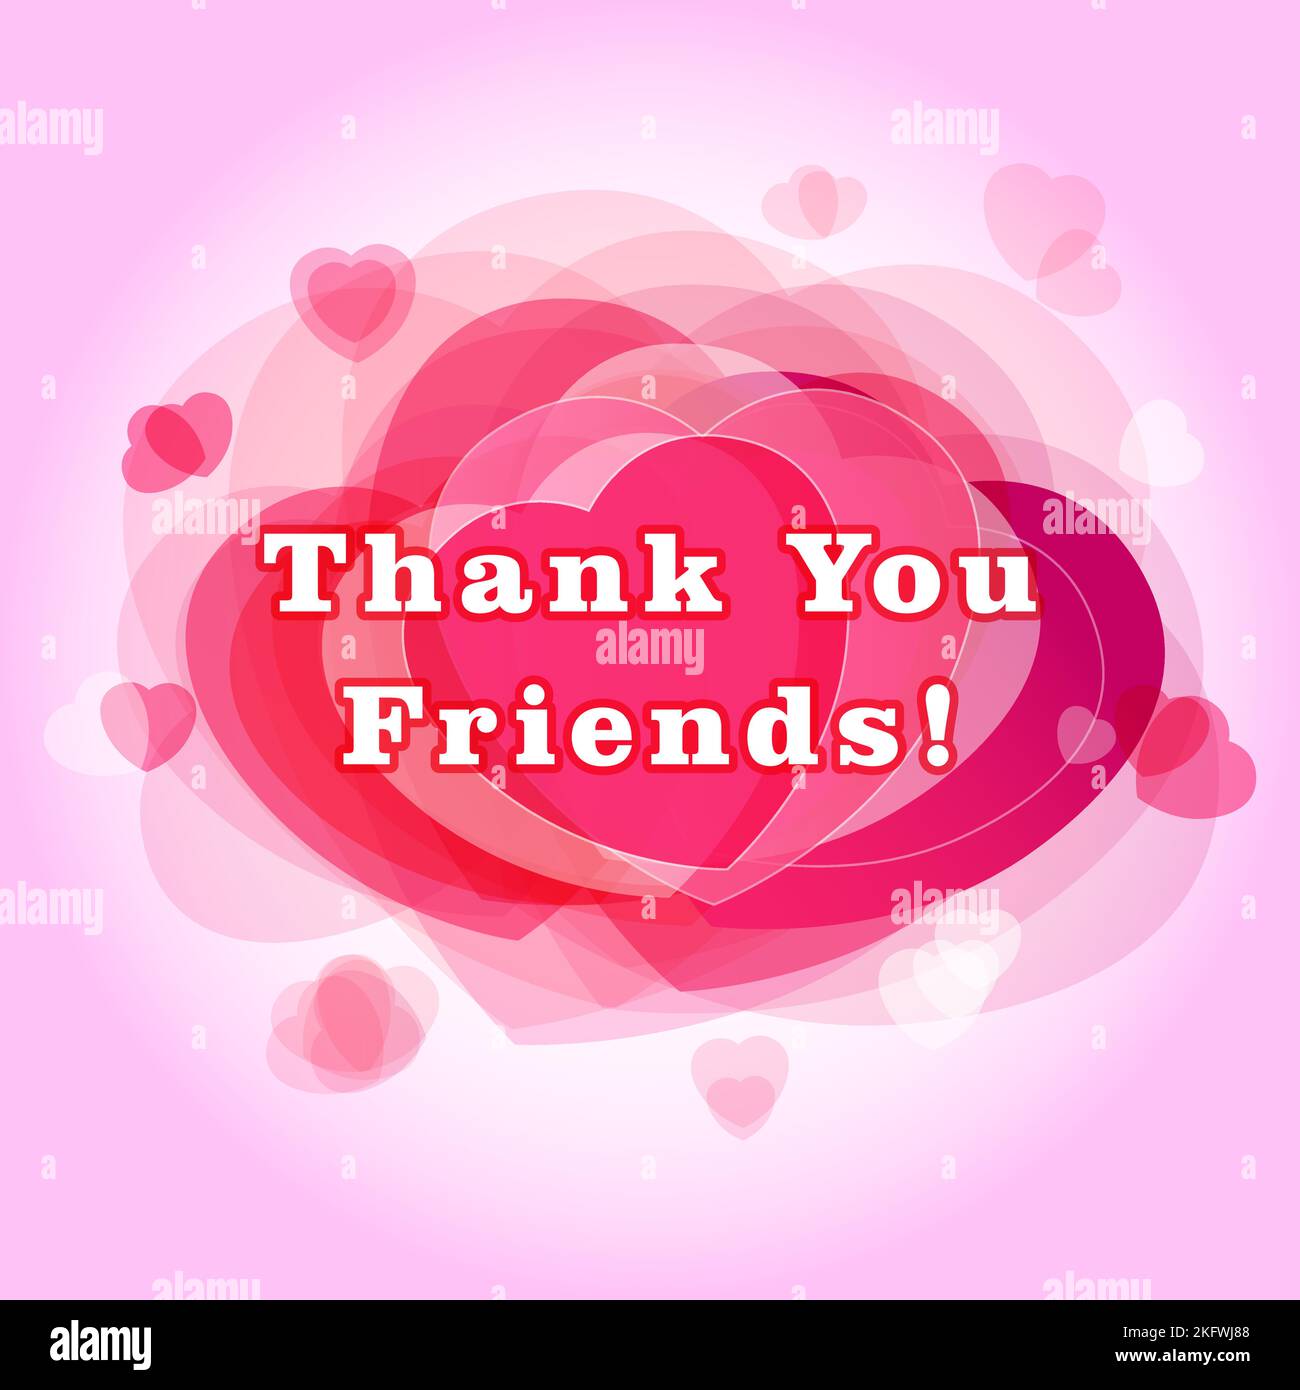 Thanks for being my friend. Thank you friends. Thank you друг. Thank you my friend. Thank you for Friendship.